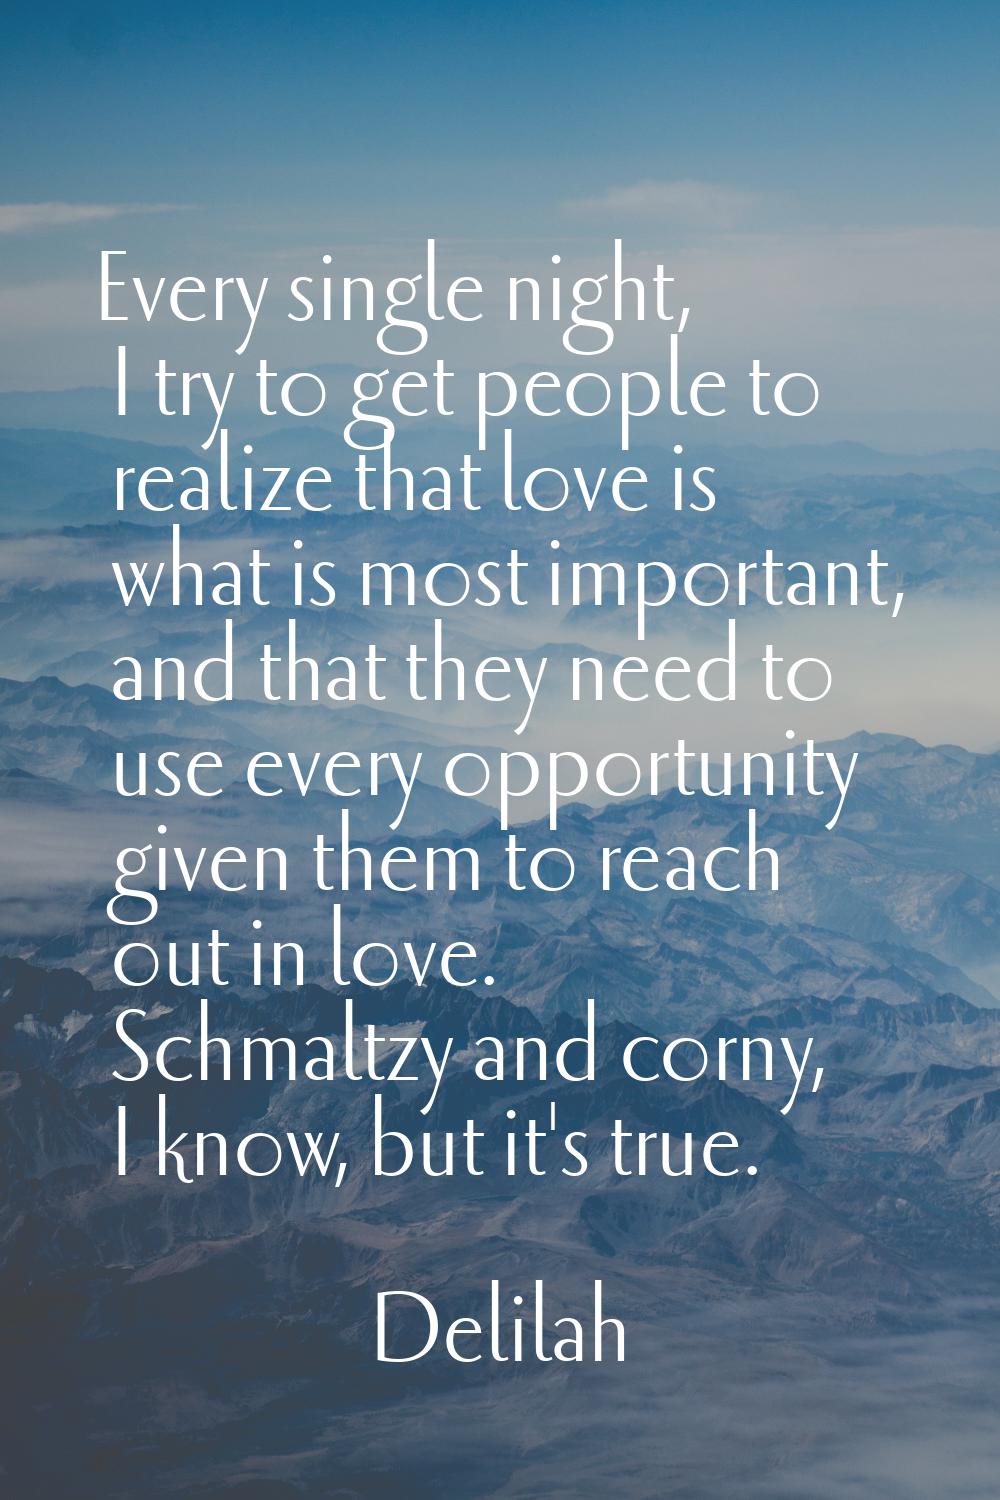 Every single night, I try to get people to realize that love is what is most important, and that th